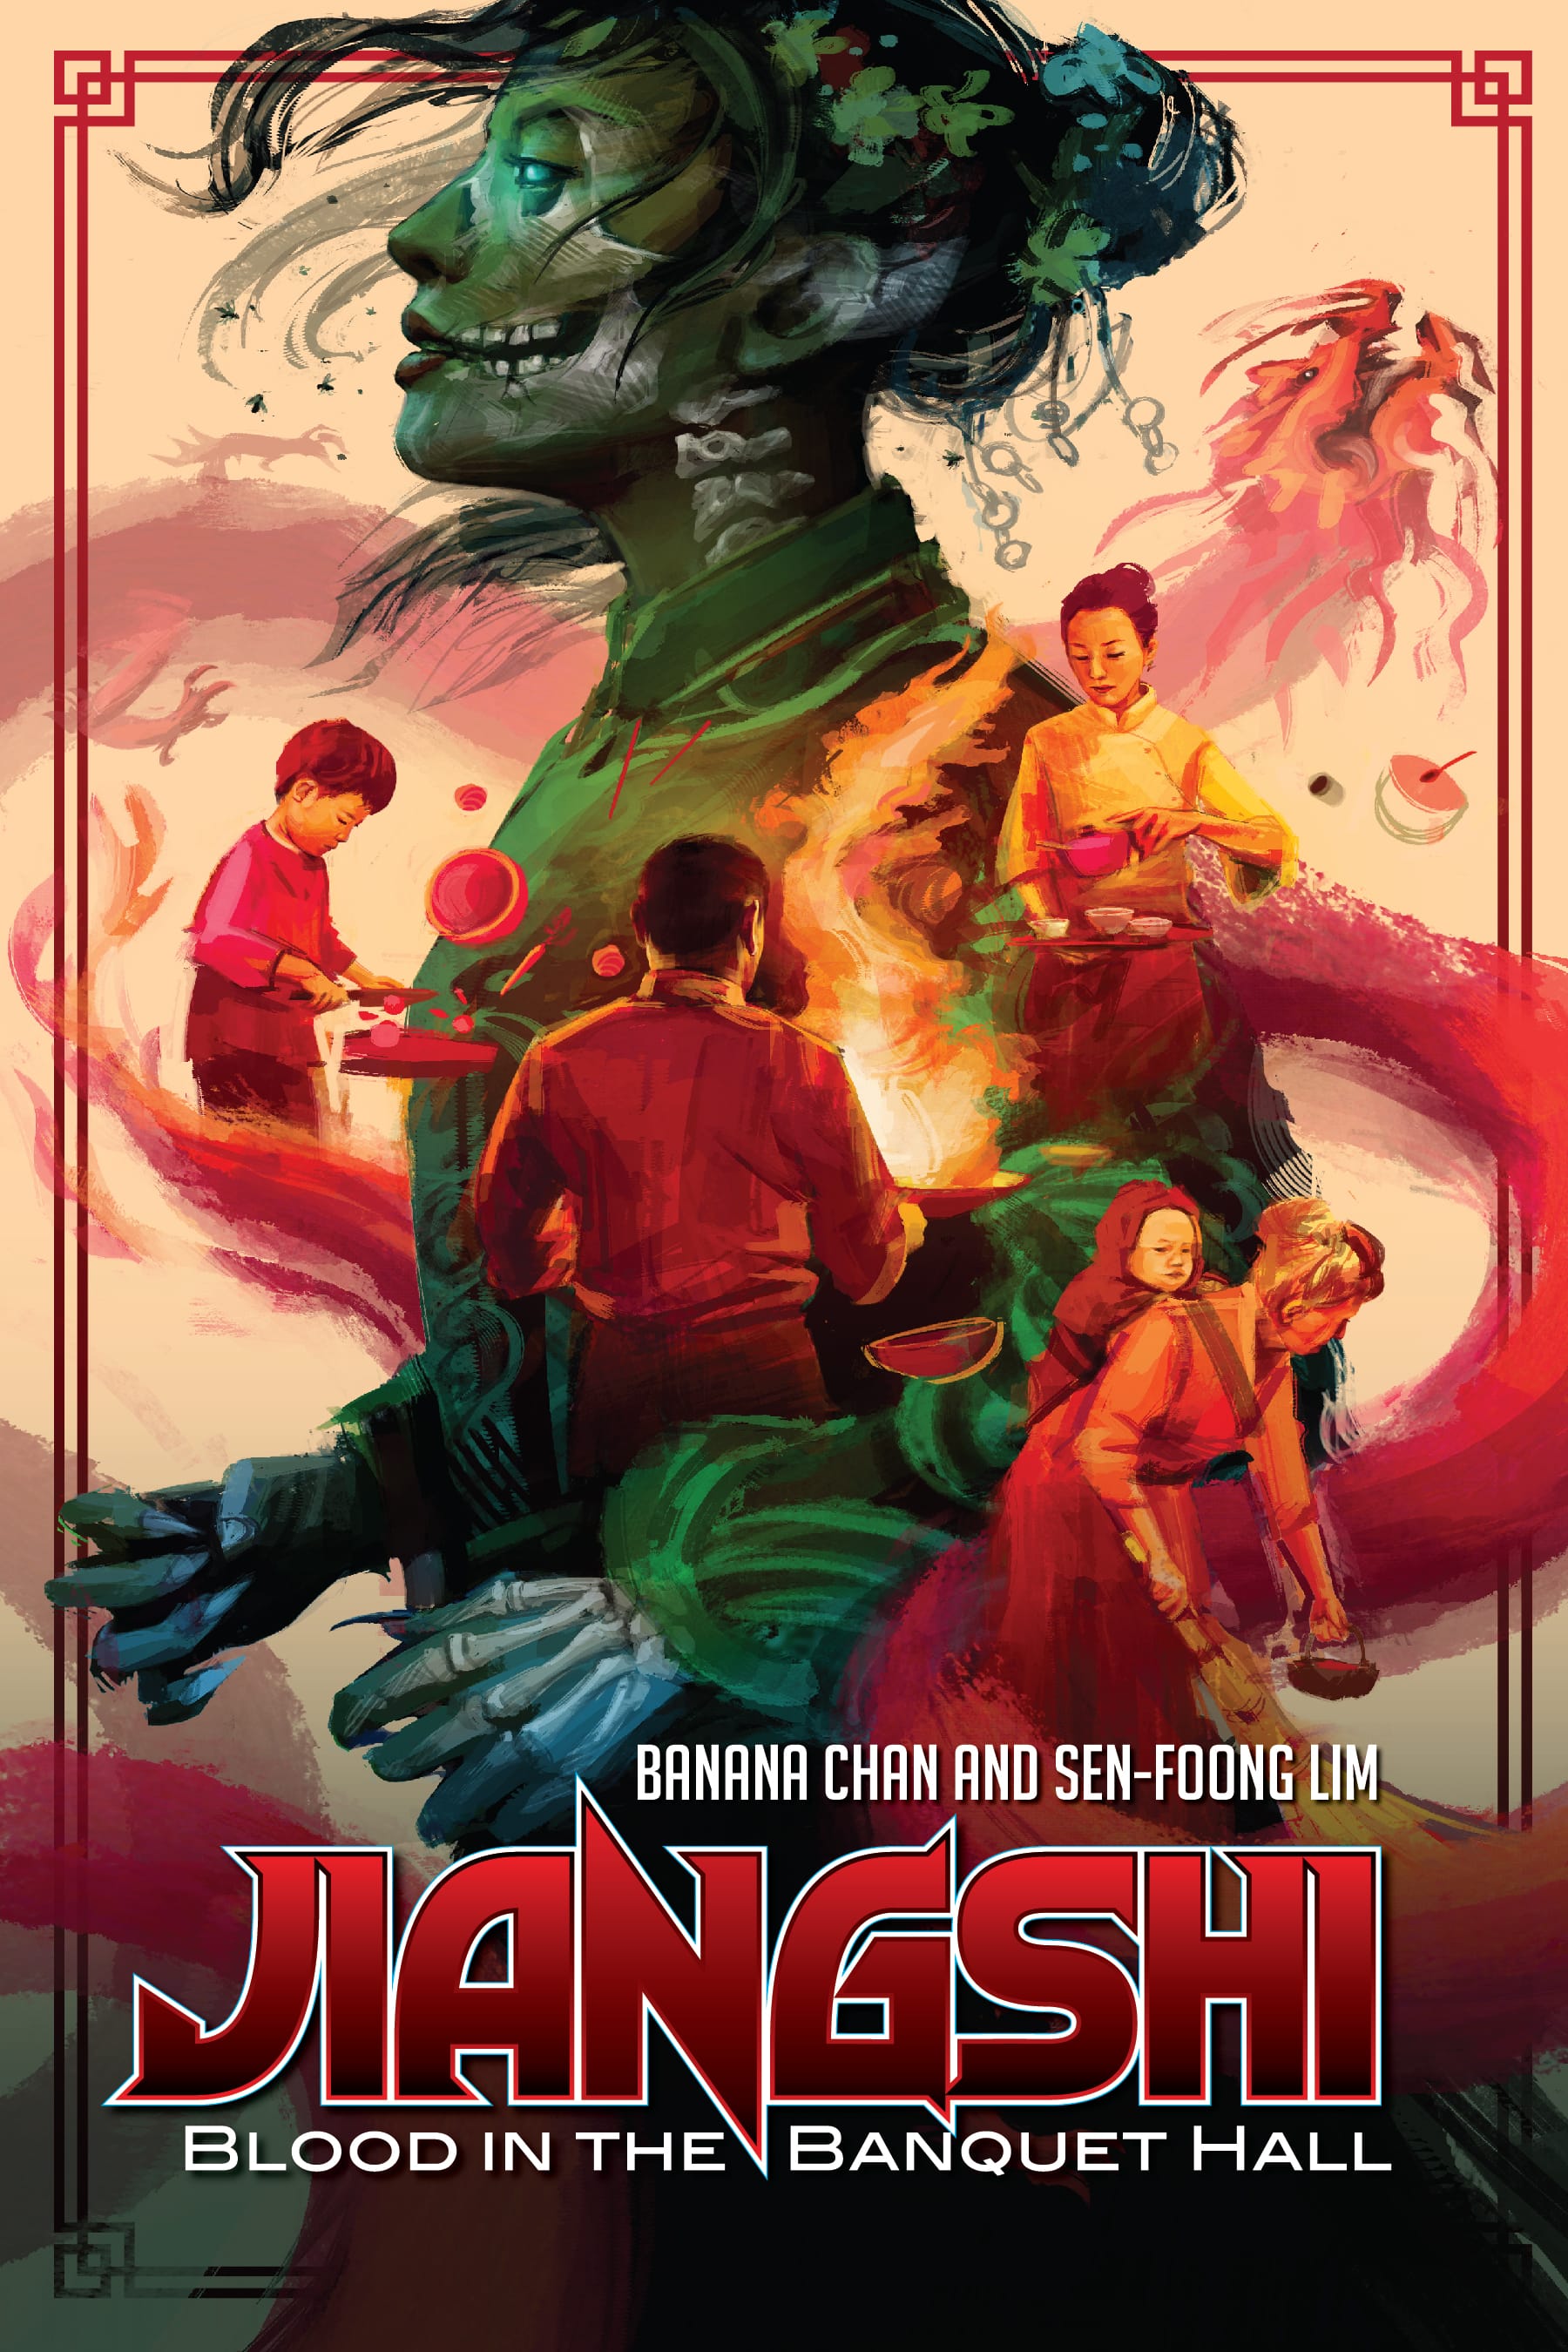 Save the Family Restaurant! Jiangshi: Blood in the Banquet Hall 2nd Printing